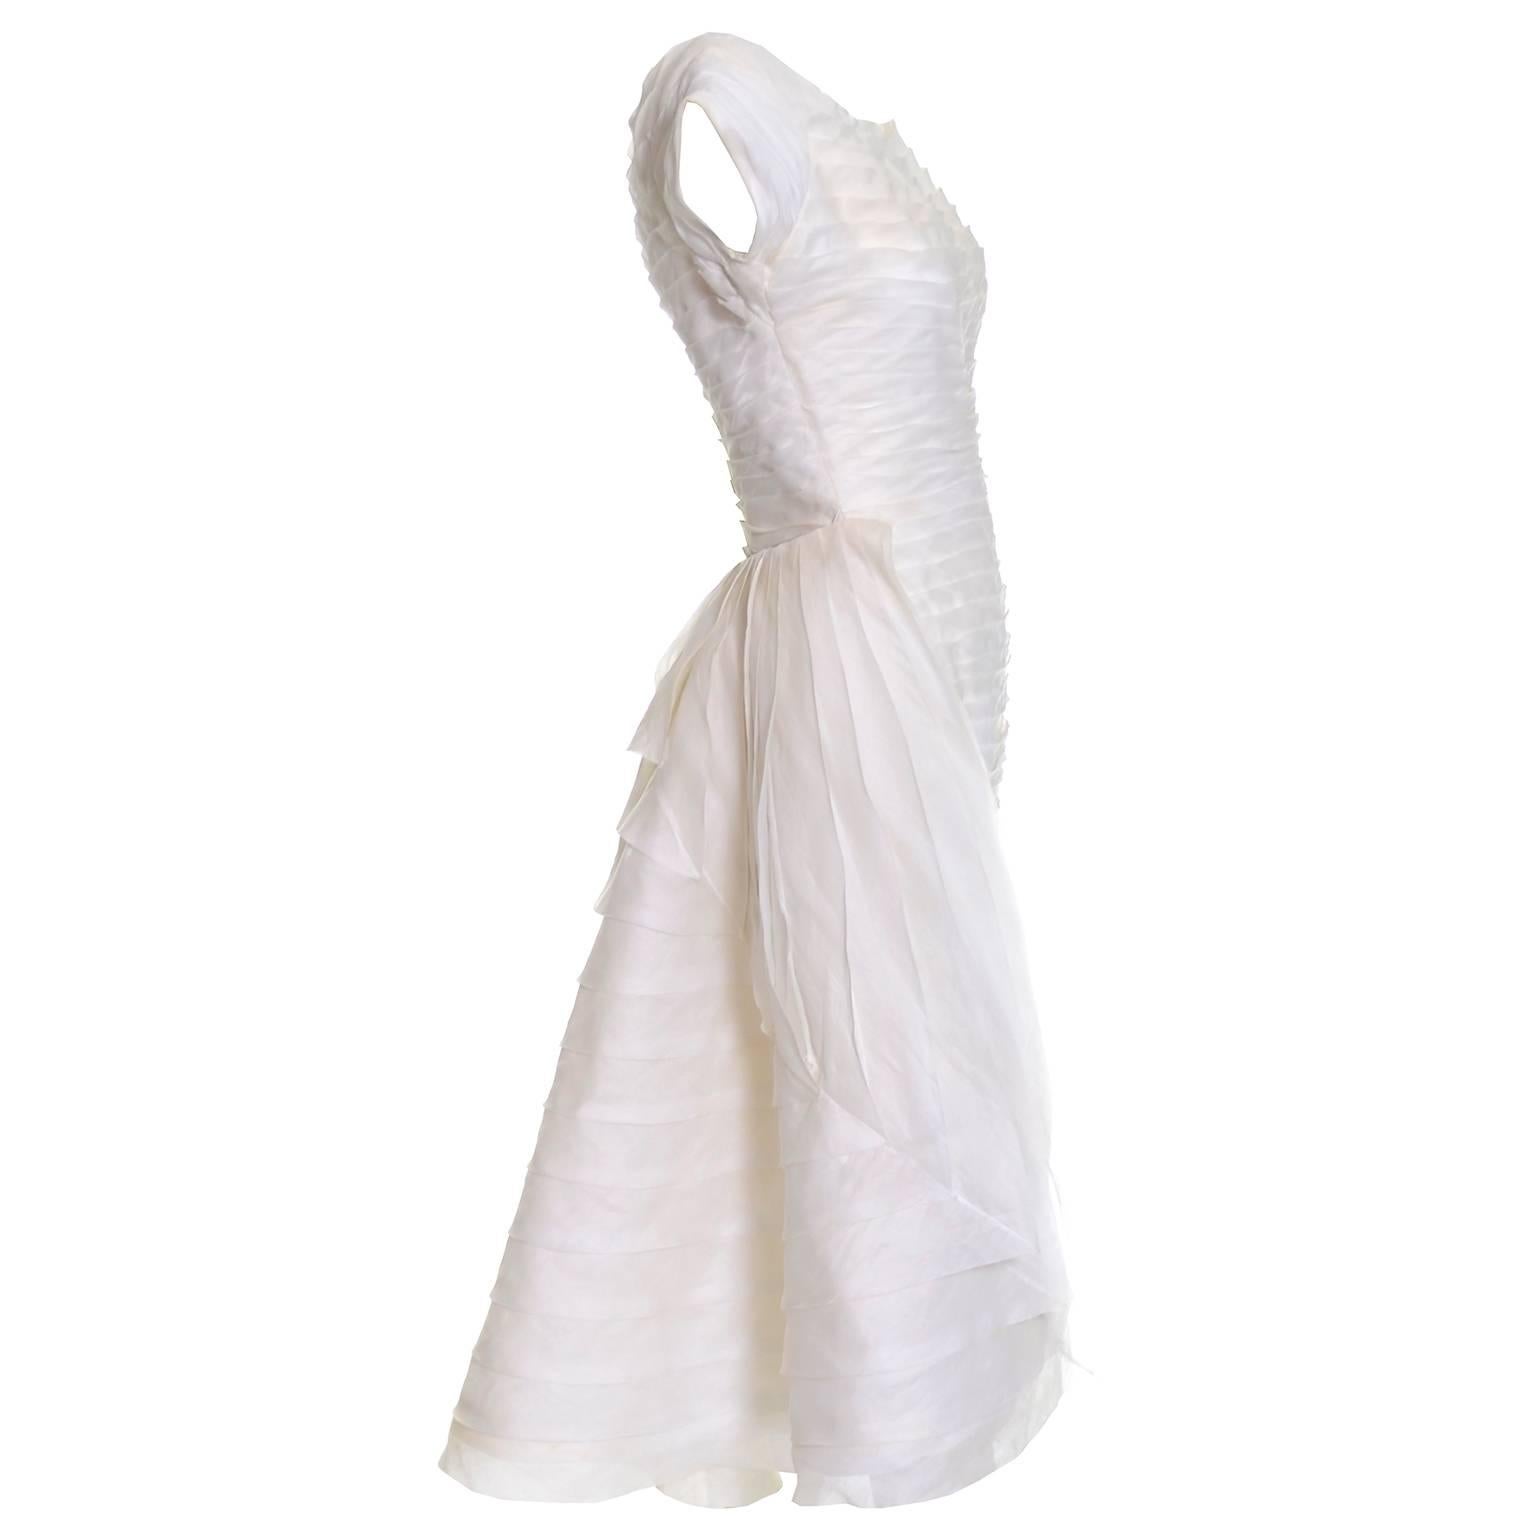 This is an absolutely outstanding vintage dress from William Cahill of Beverly Hills.  I have sold several Cahill vintage wedding dresses over the years and this one is one of my favorites!  The simple ivory organza wiggle dress is pleated and has a